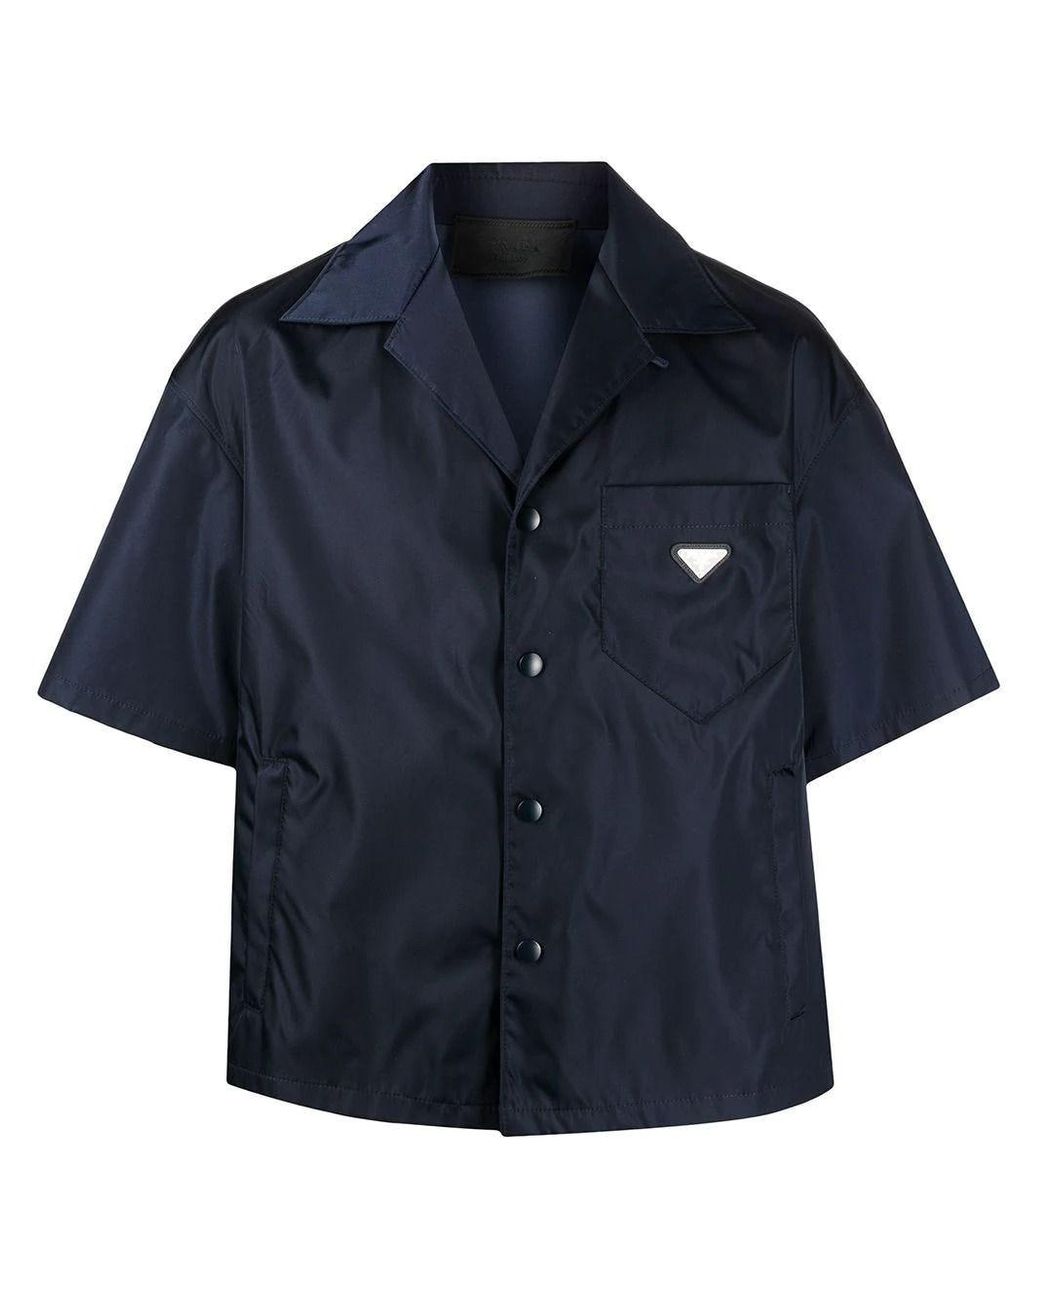 Prada Synthetic Navy Loose-fit Bowling Shirt in Blue for Men - Lyst